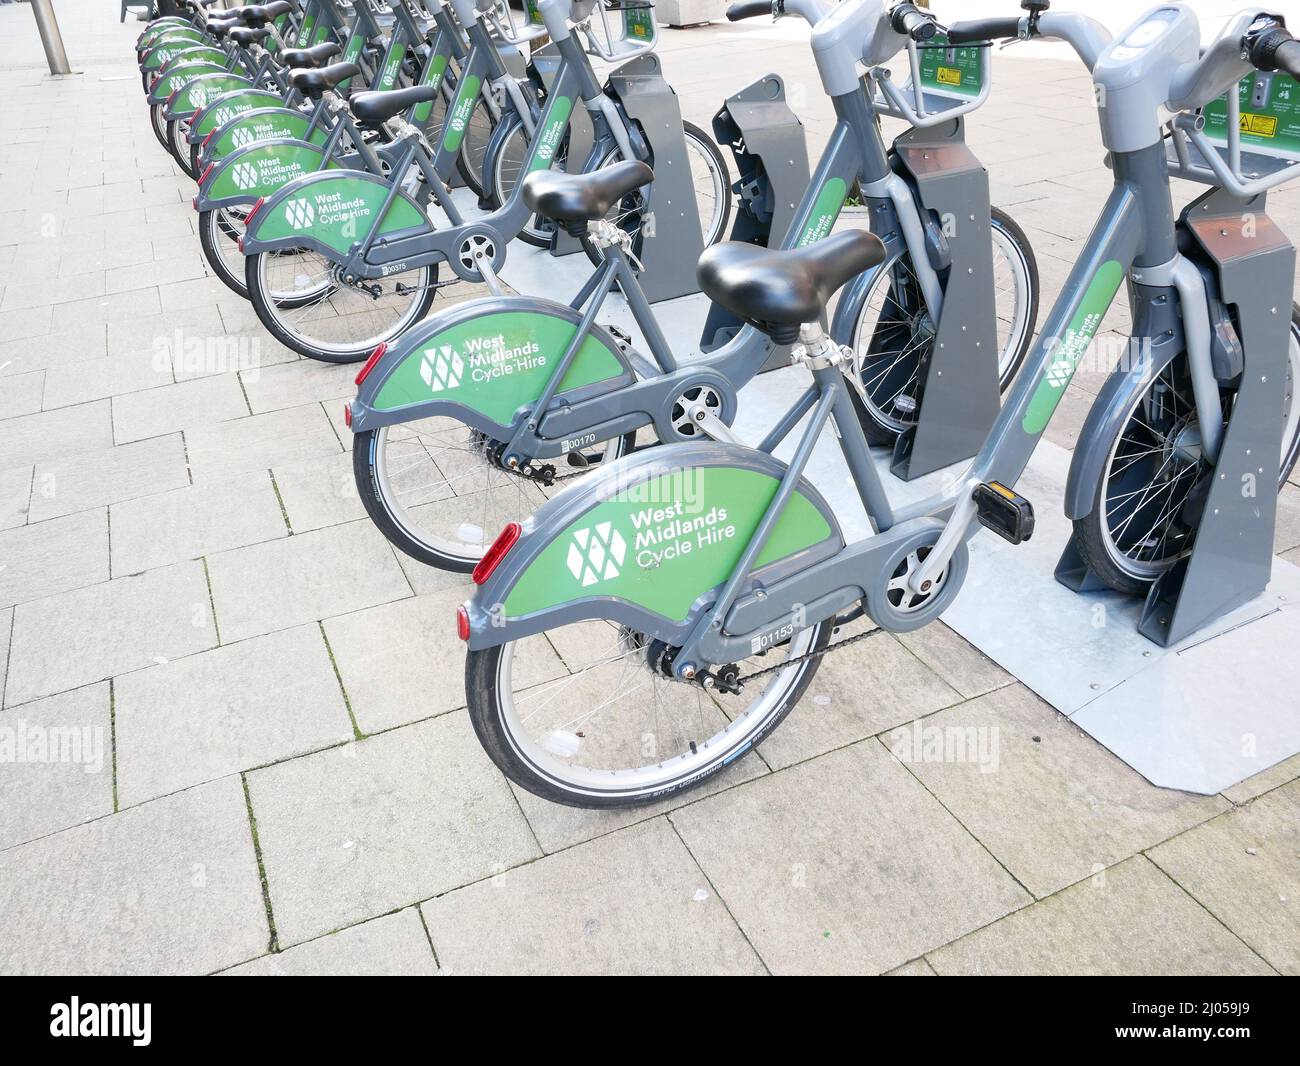 West Midlands Cycle Hire bicycles on street stand in Birmingham, UK Stock Photo